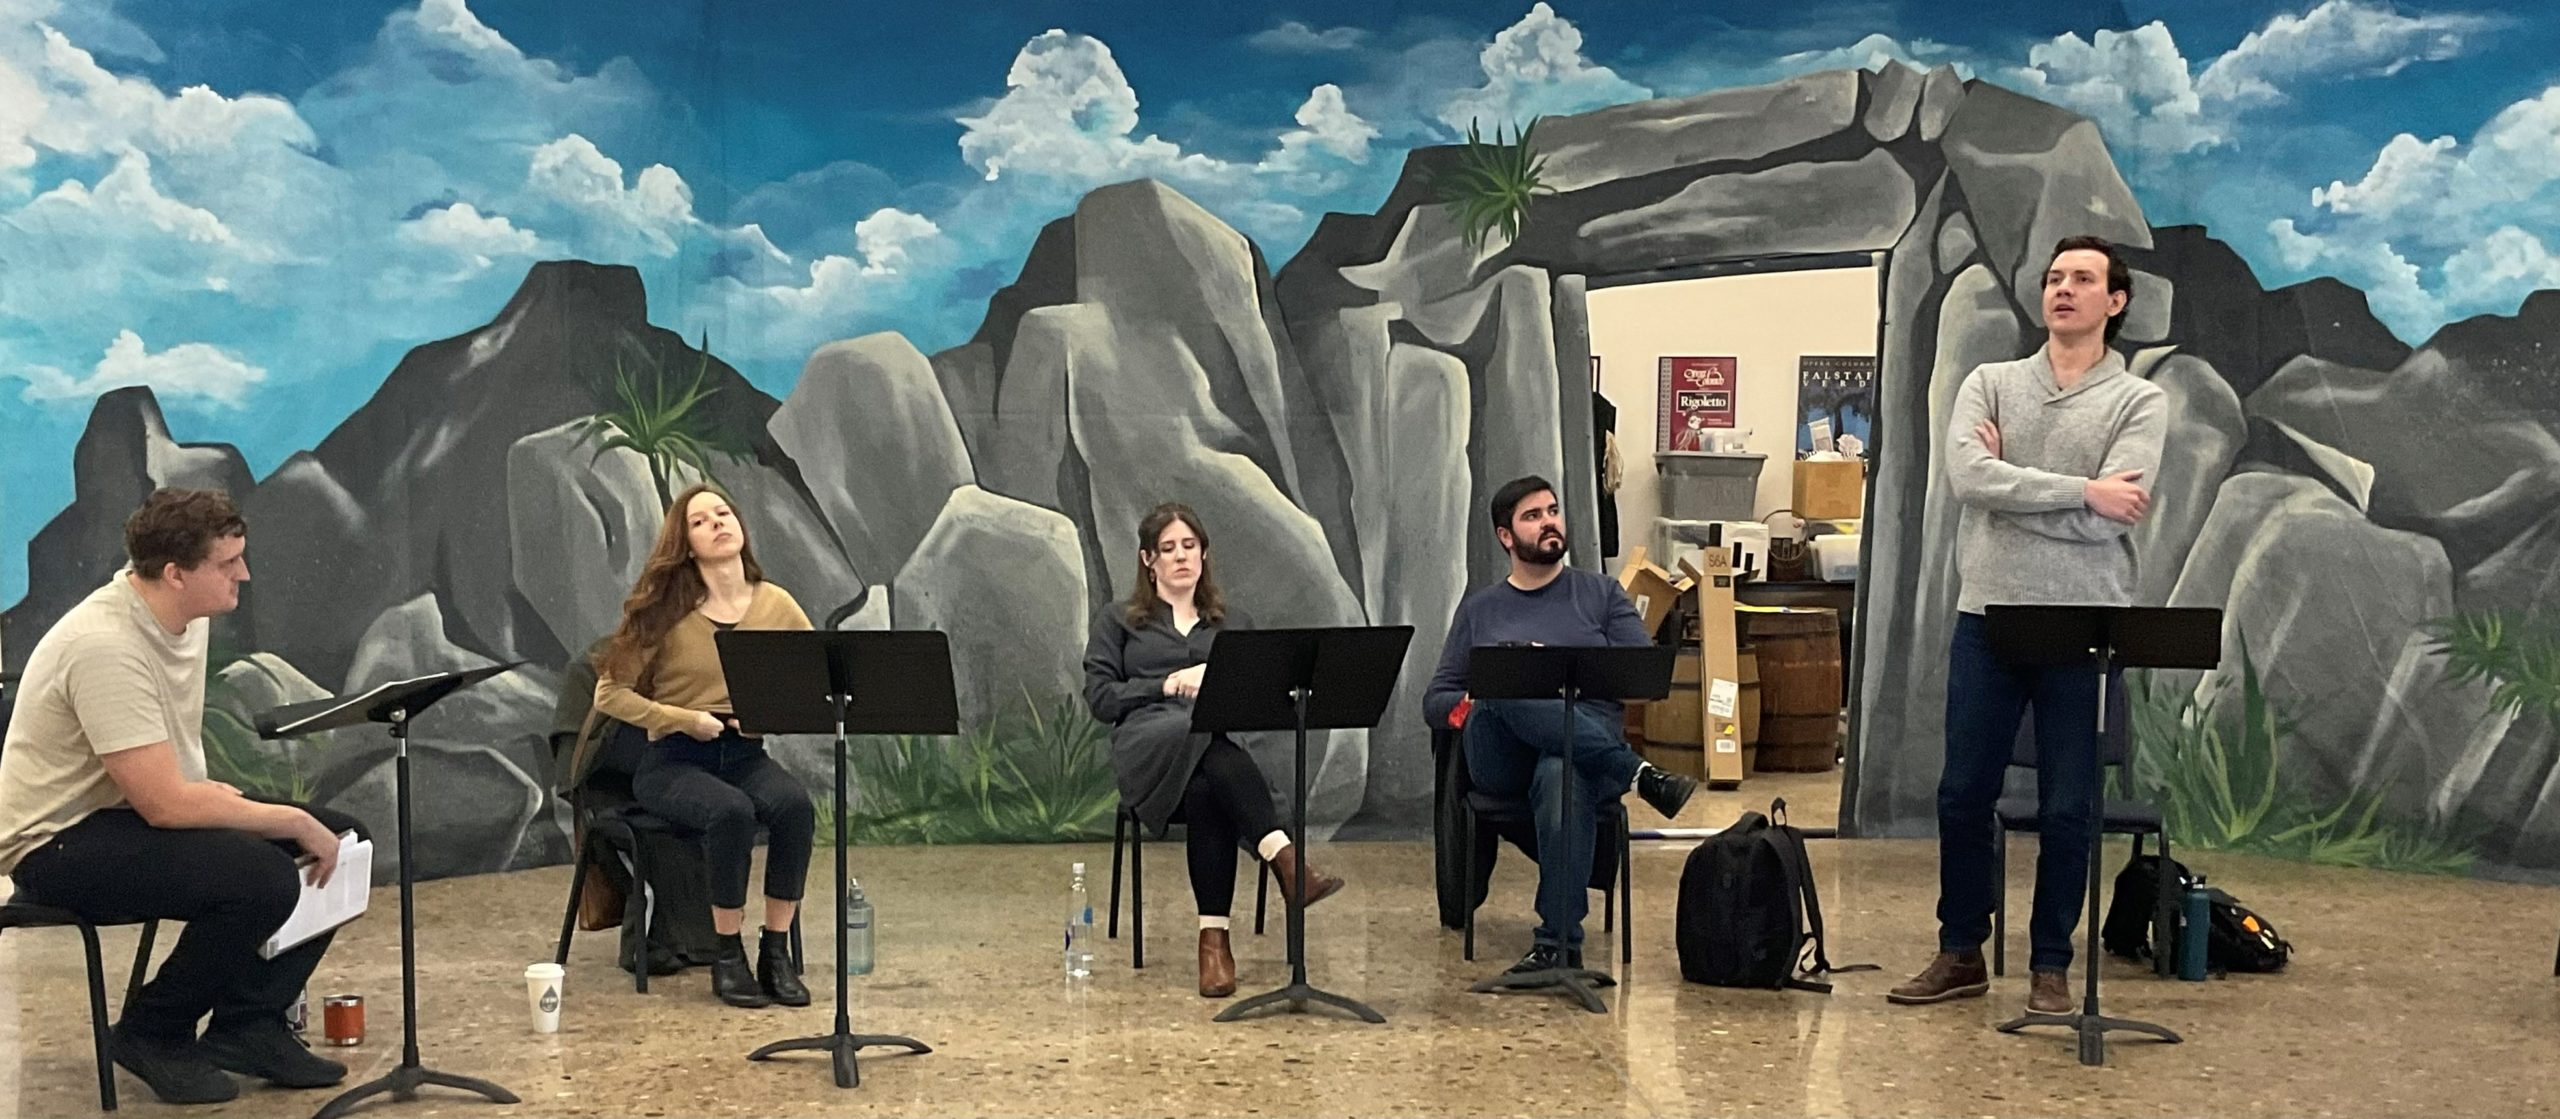 The Opera Colorado Artists in Residence sit in front of the rocky cove set for Pirates to rehearse